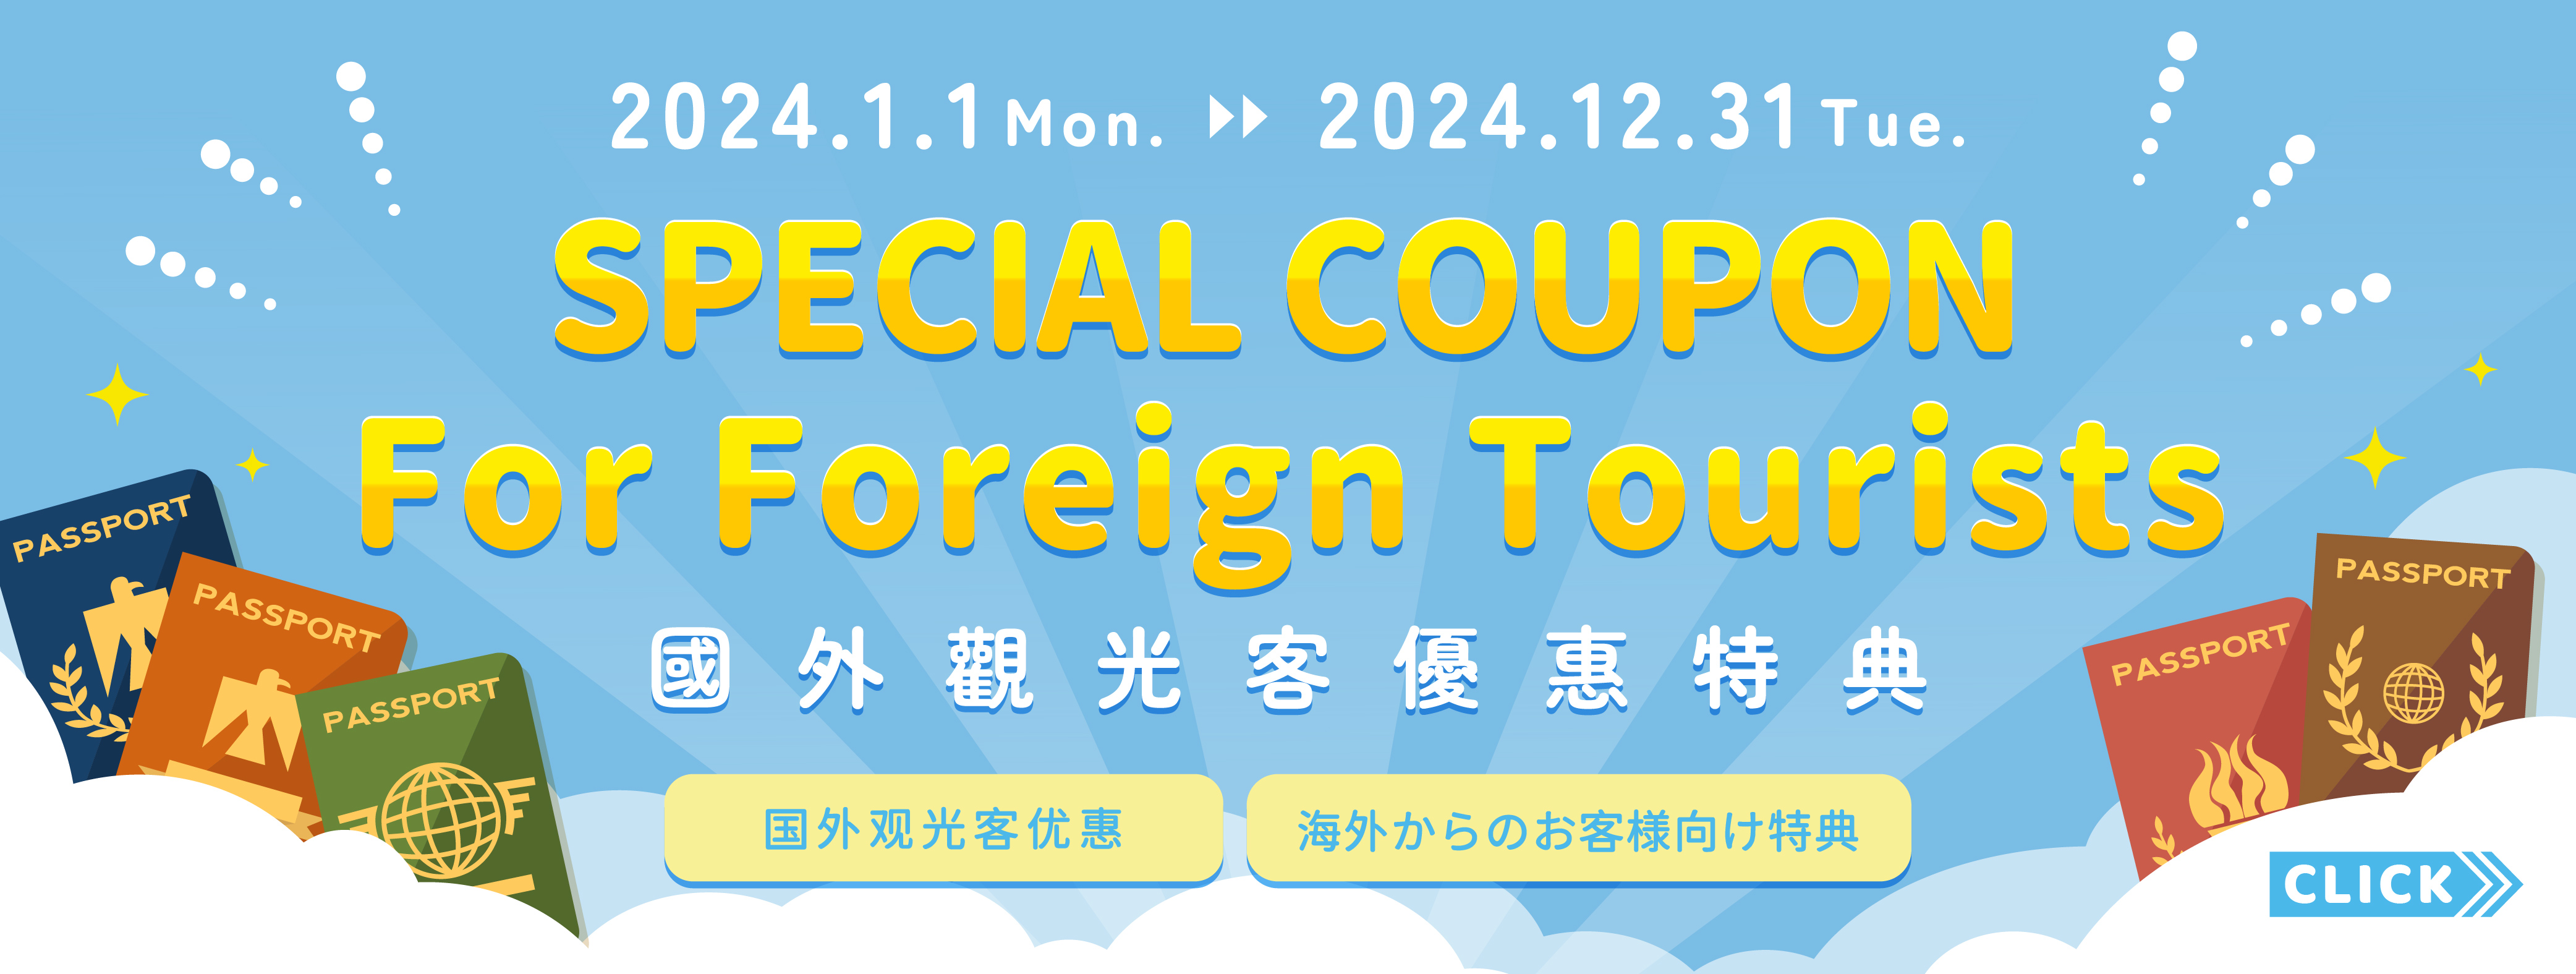 SPECIAL COUPON For Foreign Tourists_簡